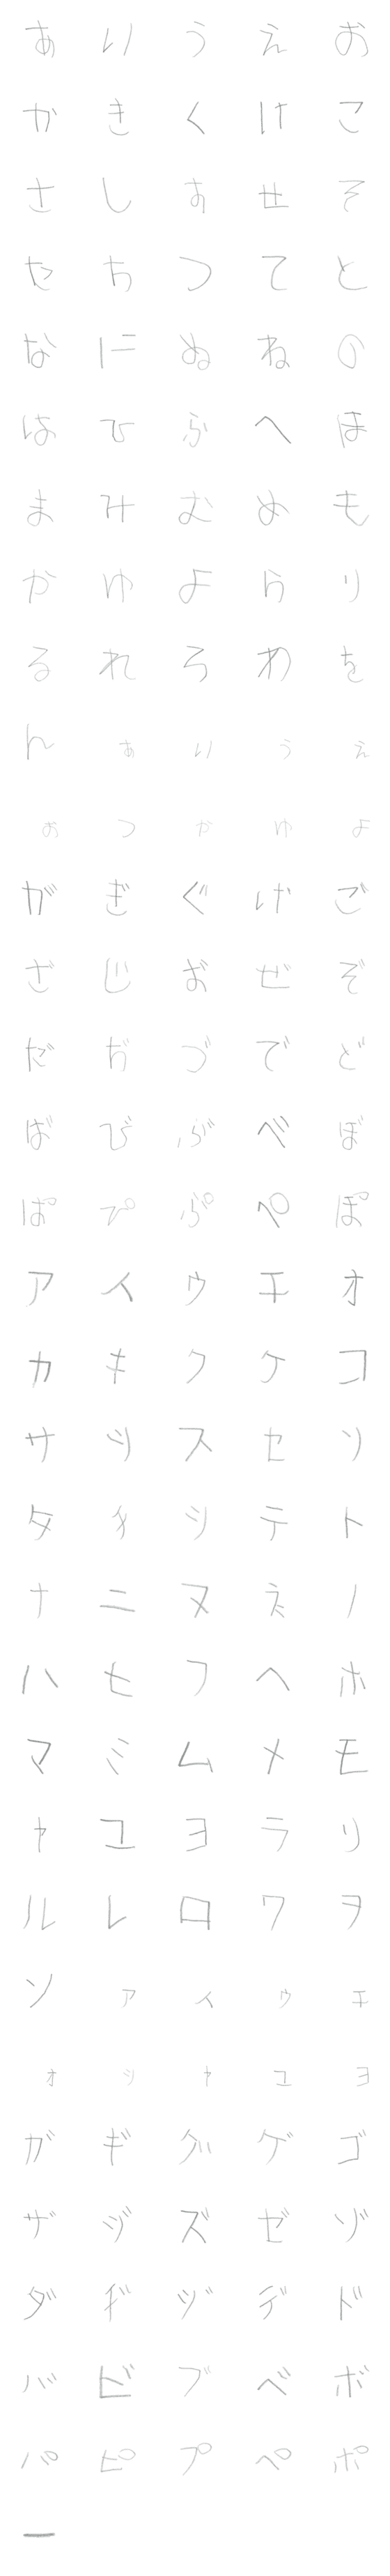 [LINE絵文字]5歳字の画像一覧